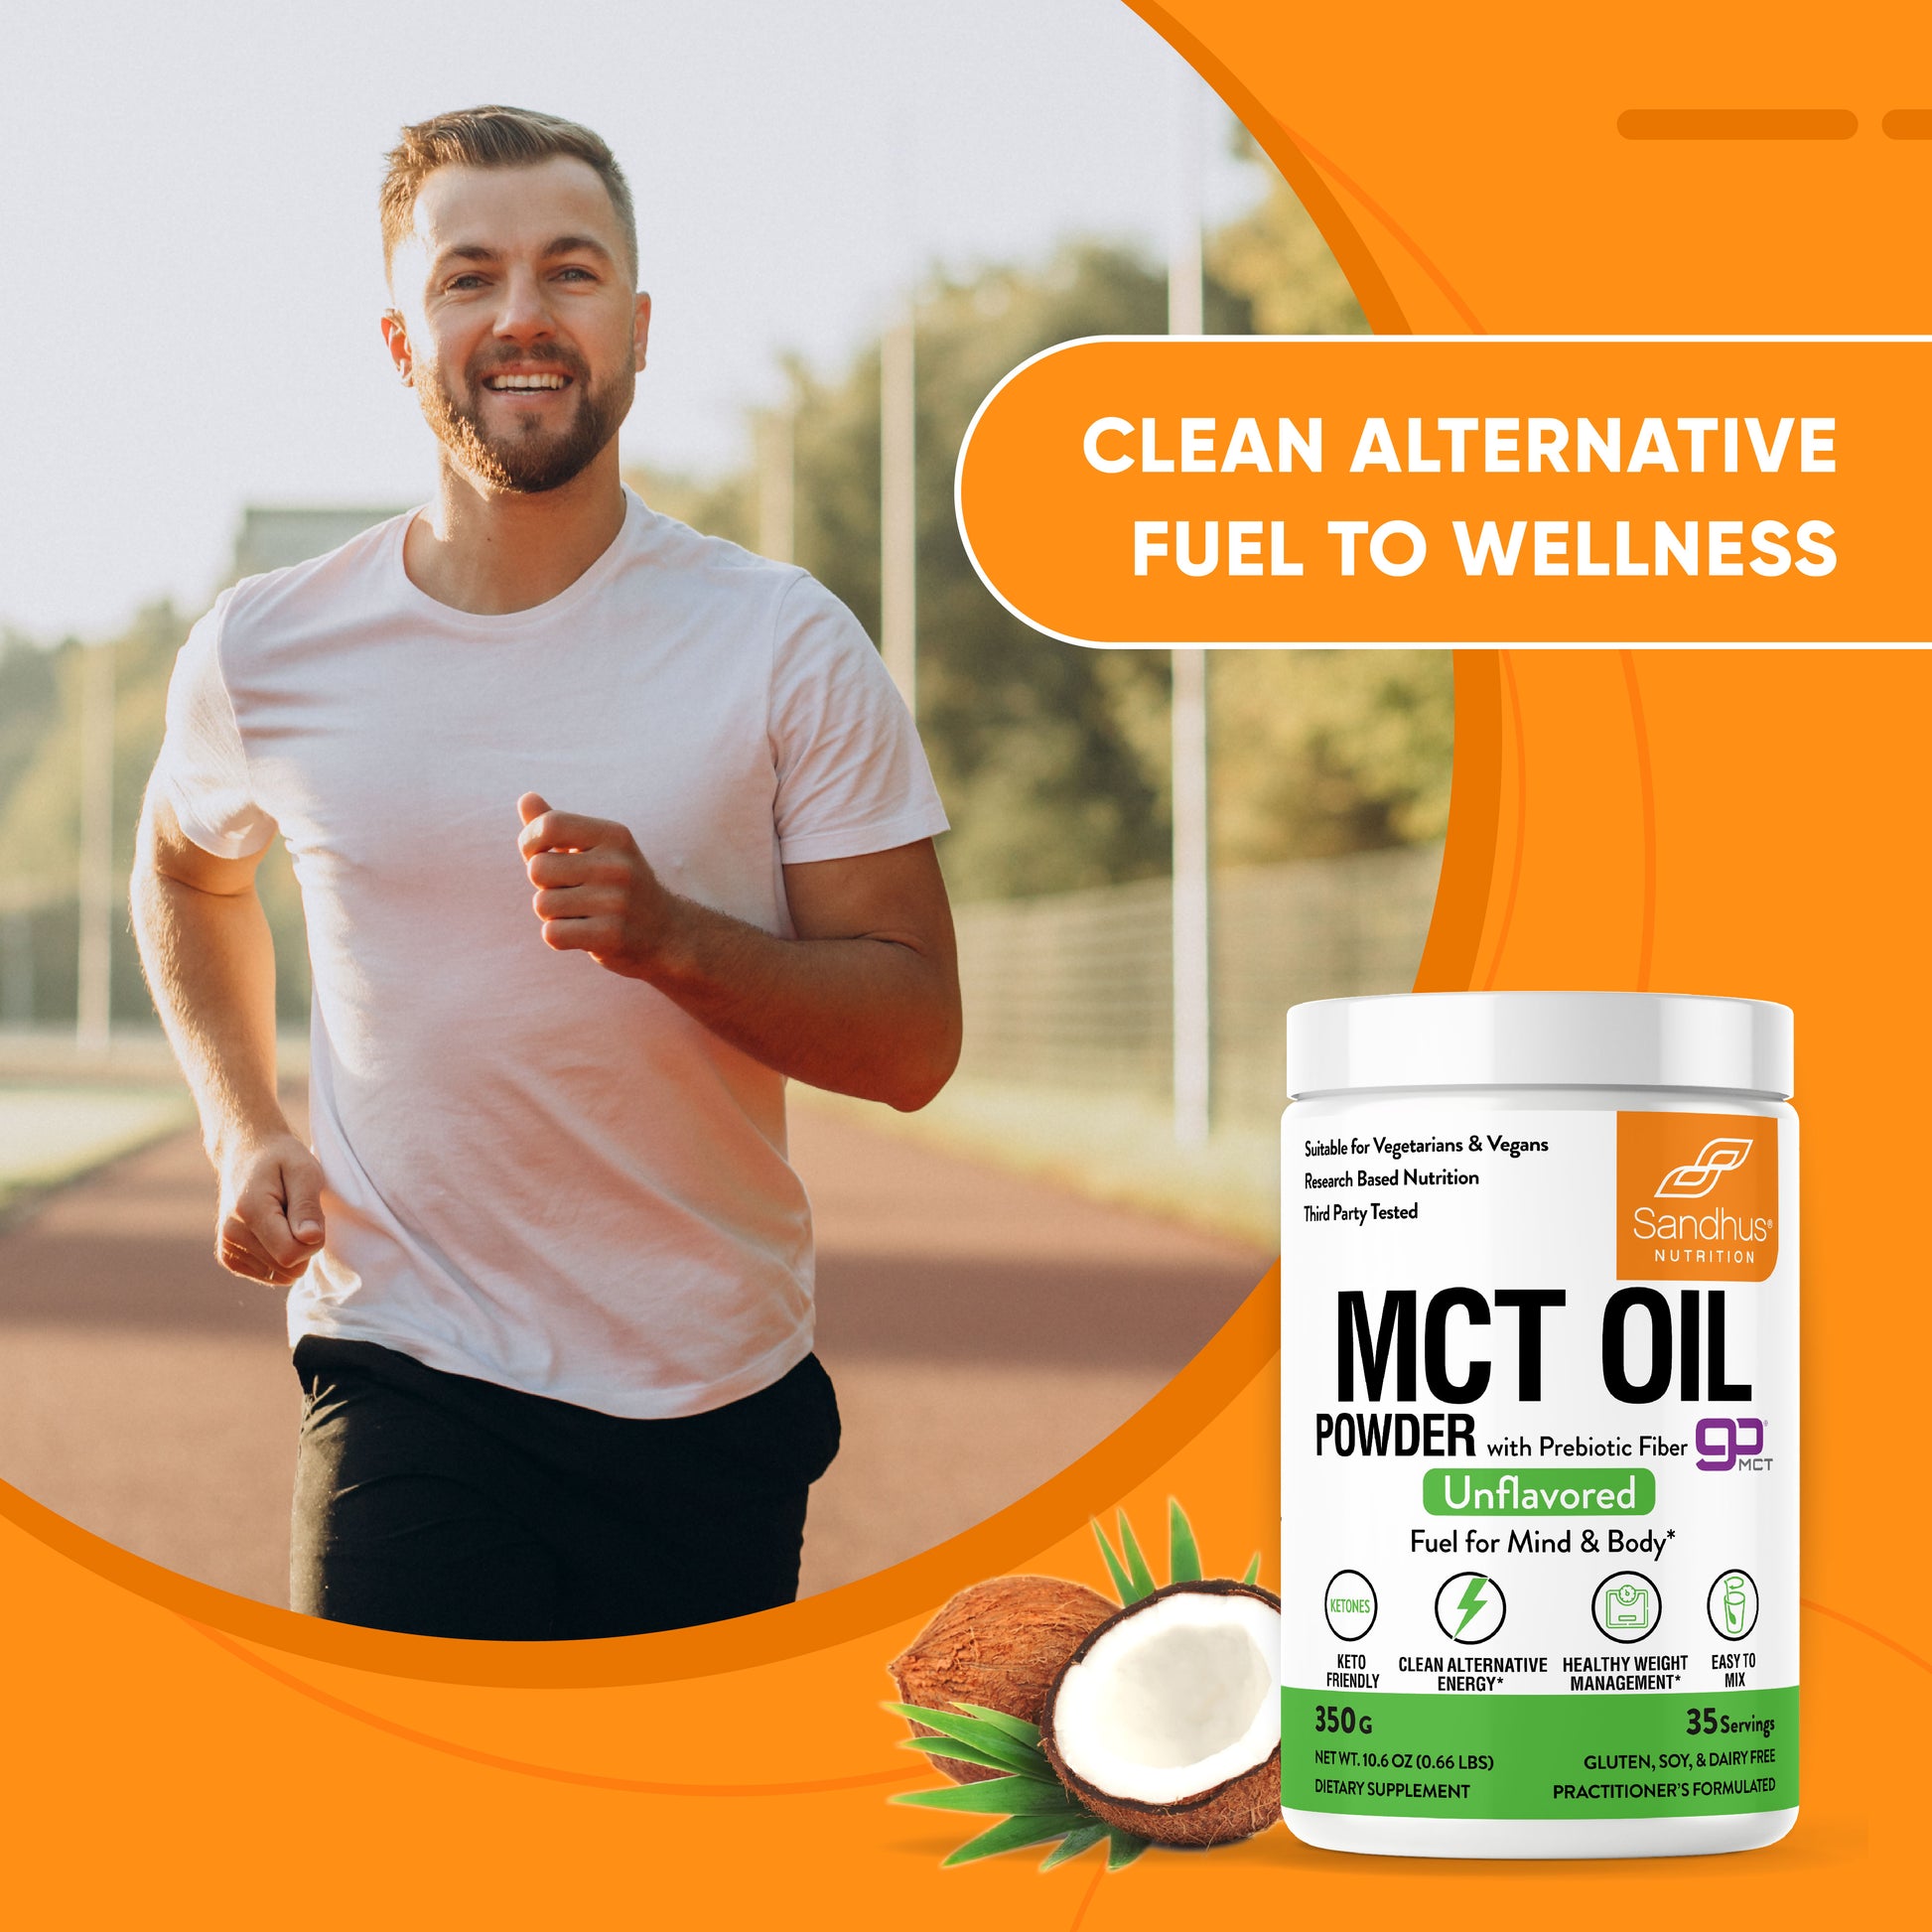 7 Science-Based Benefits of MCT Oil